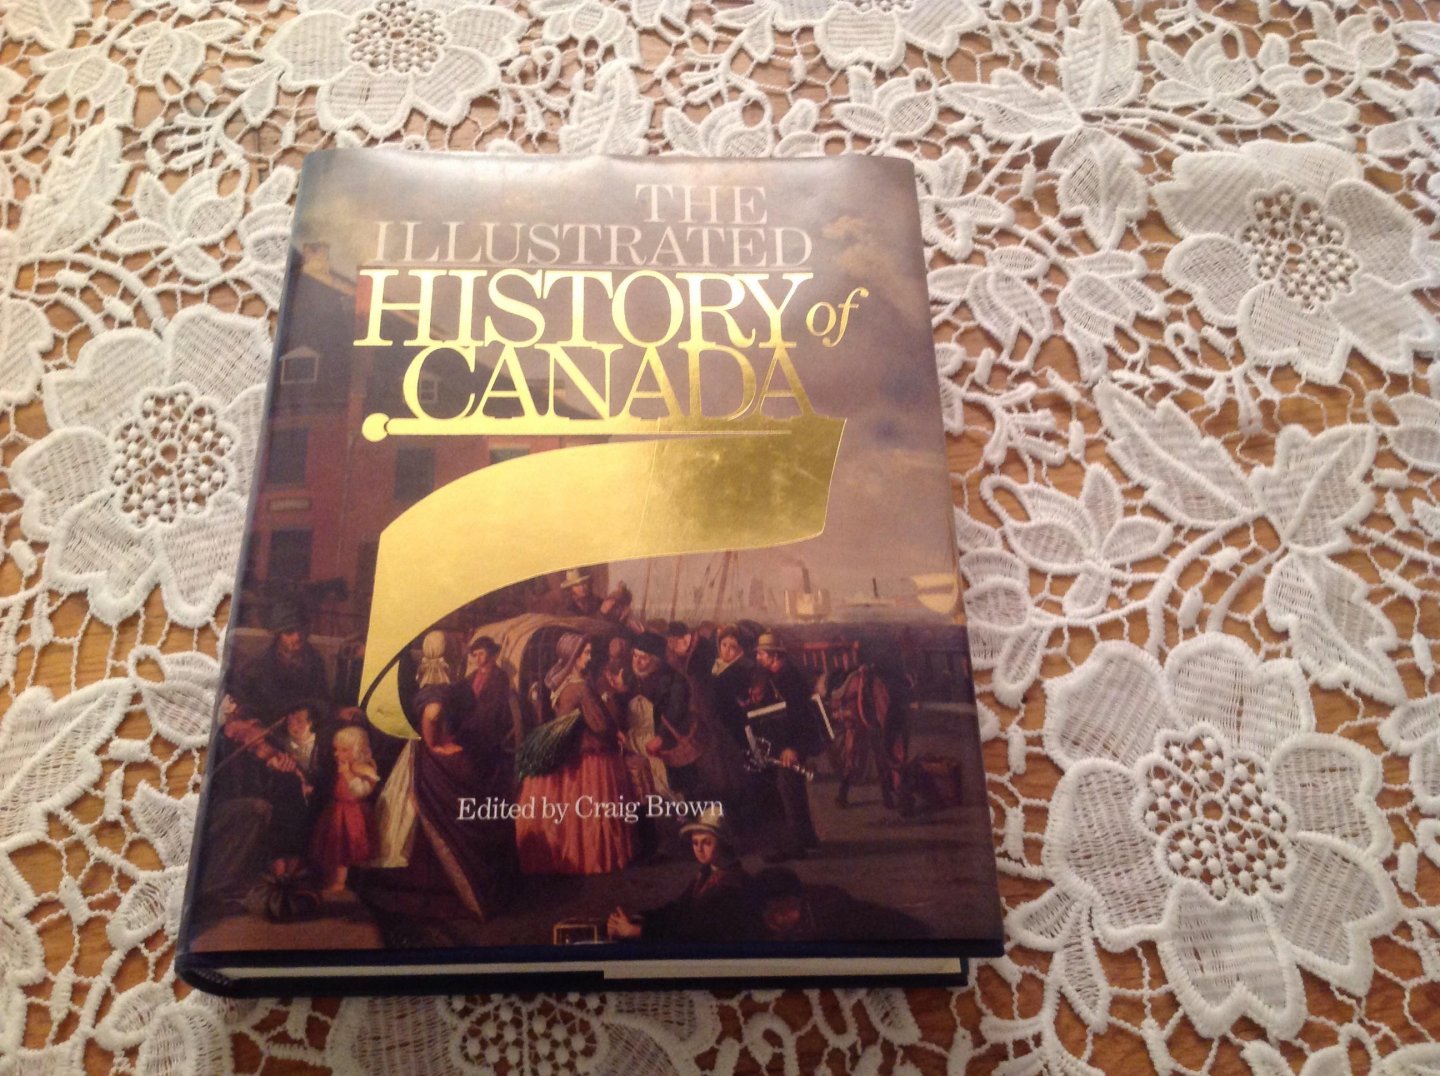 Craig Brown - The Illustrated History of Canada